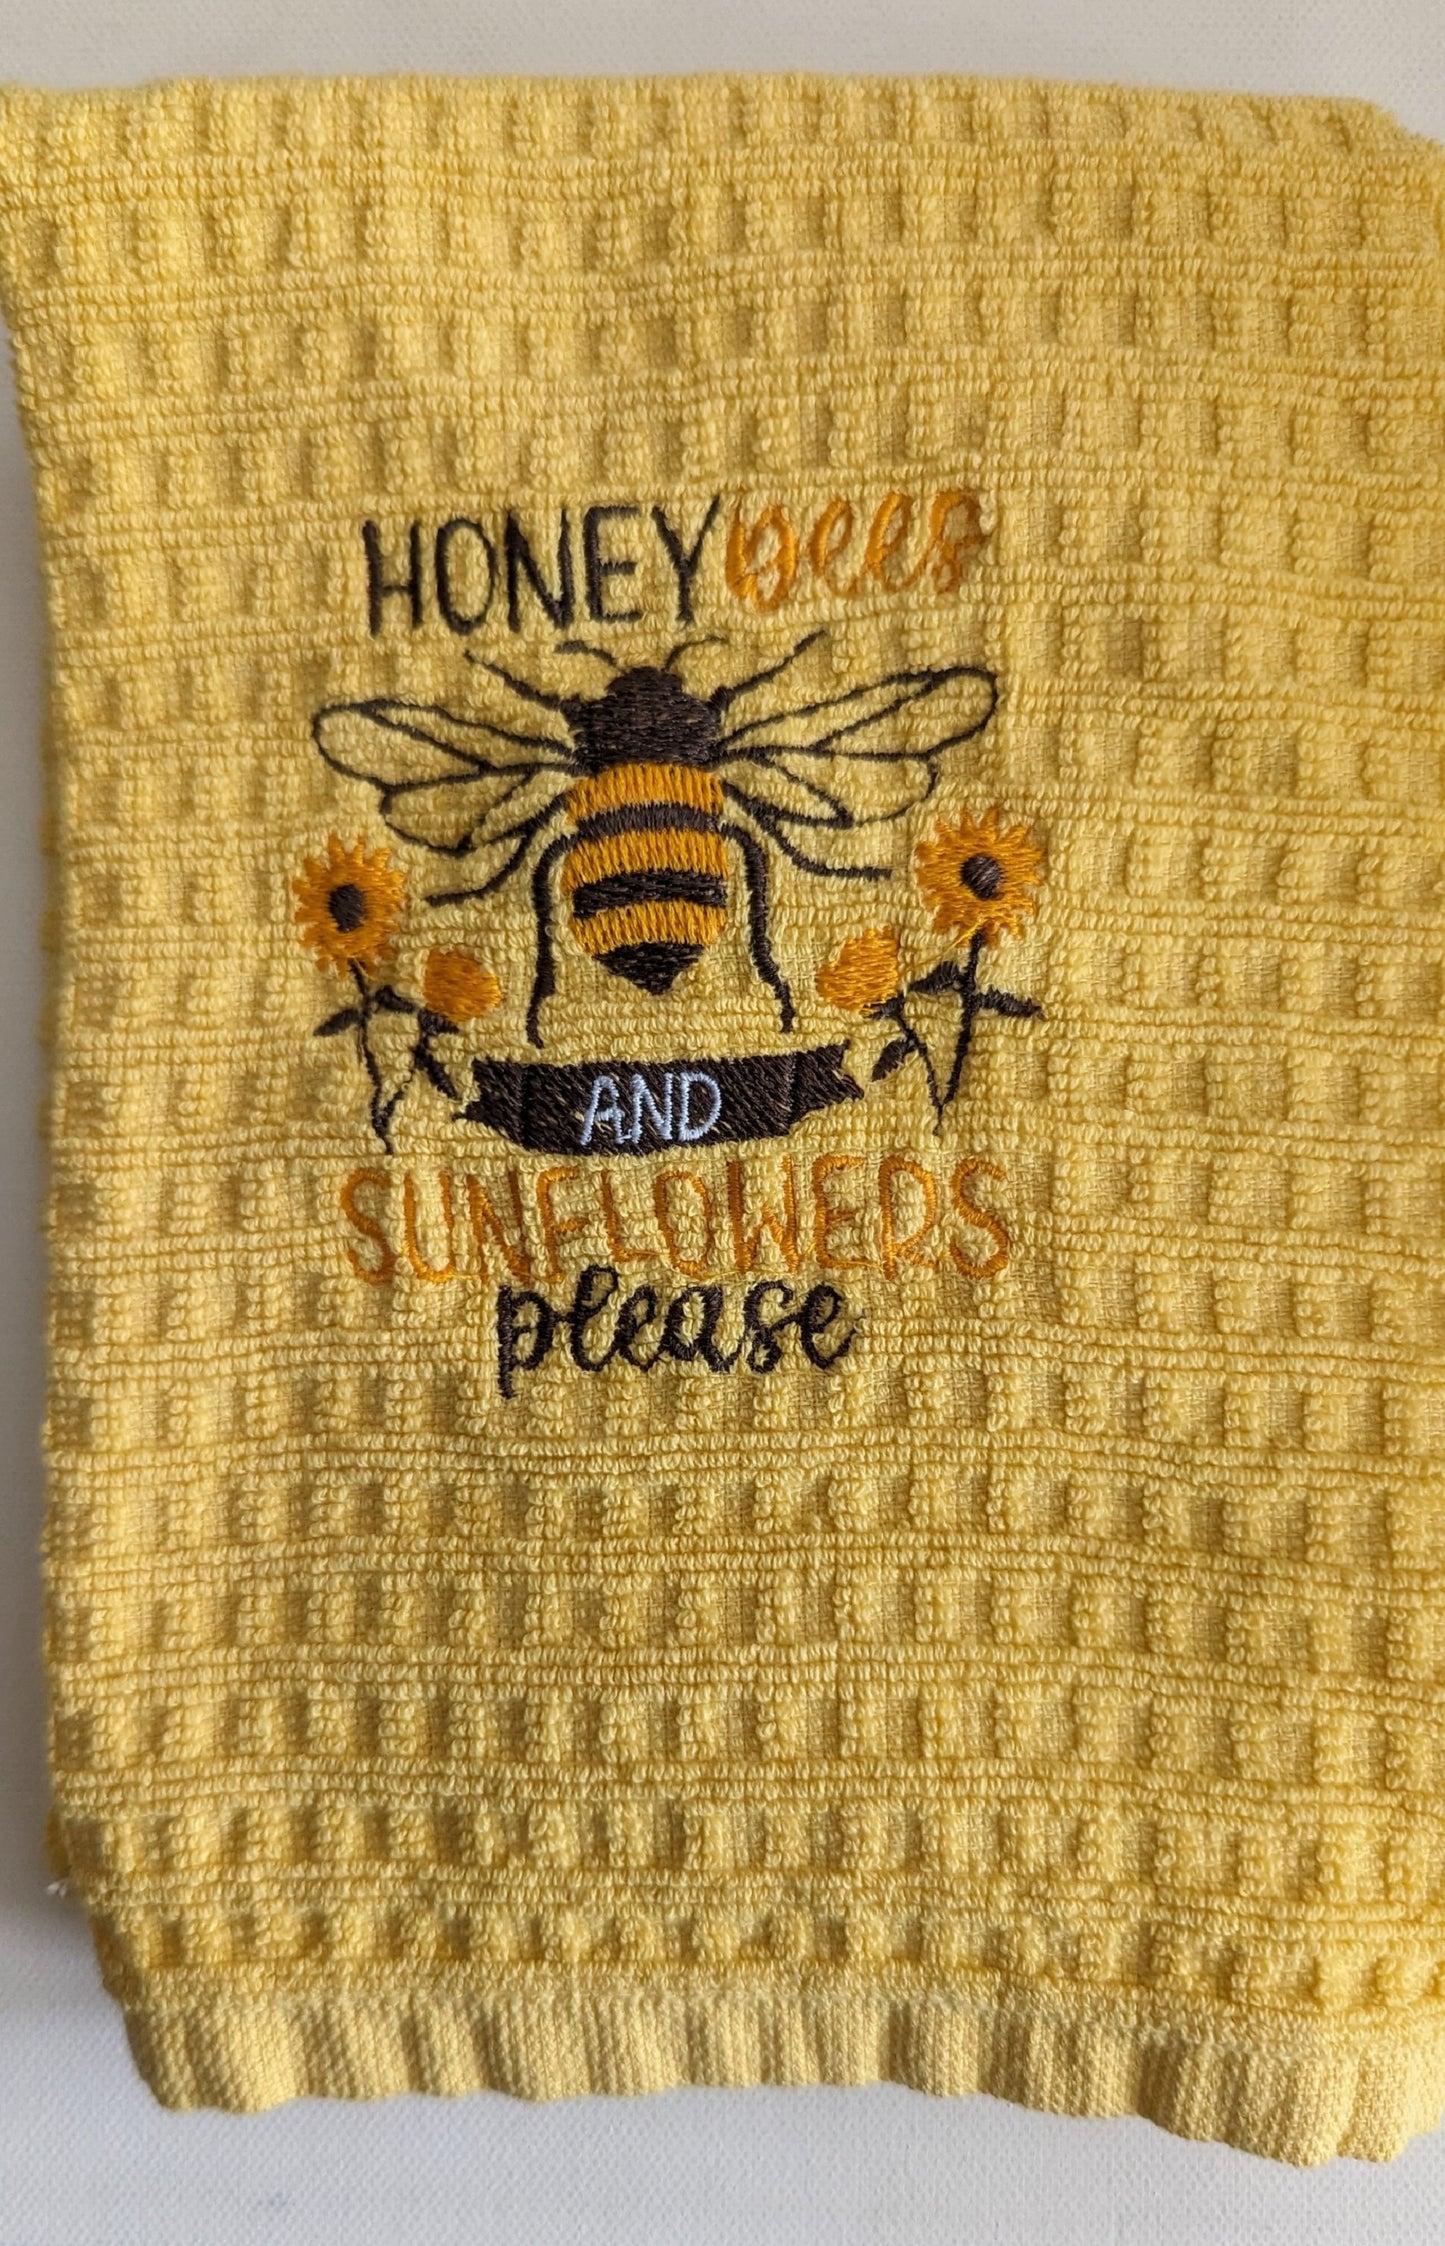 Machine Embroidered Kitchen Towel-Honey Bees and Sunflowers Please